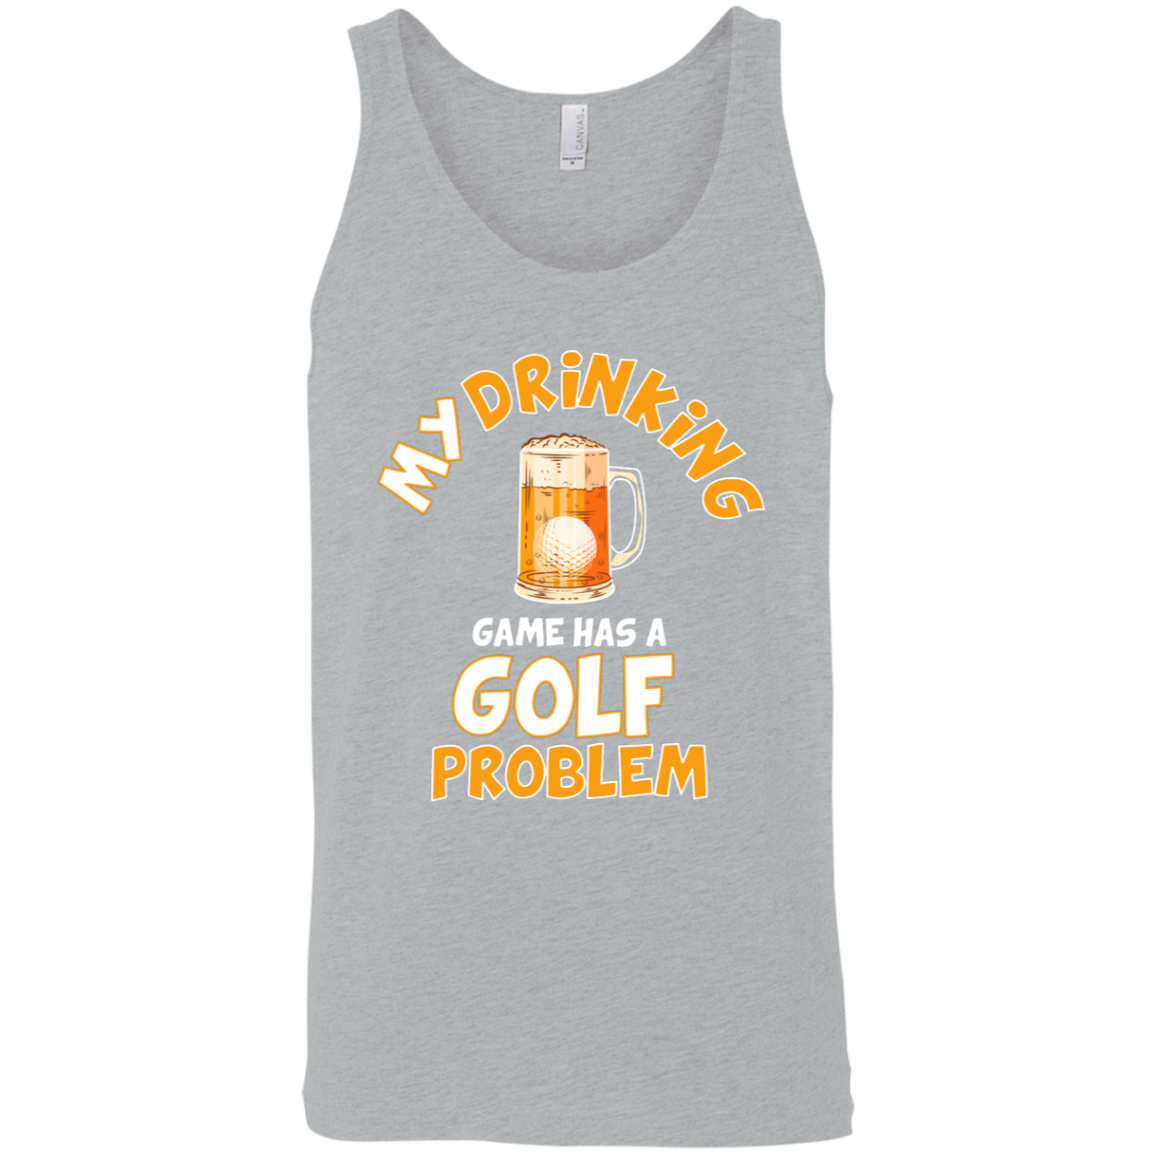 My Drinking Game Has A Golf Problem Tank Top Apparel - The Beer Lodge